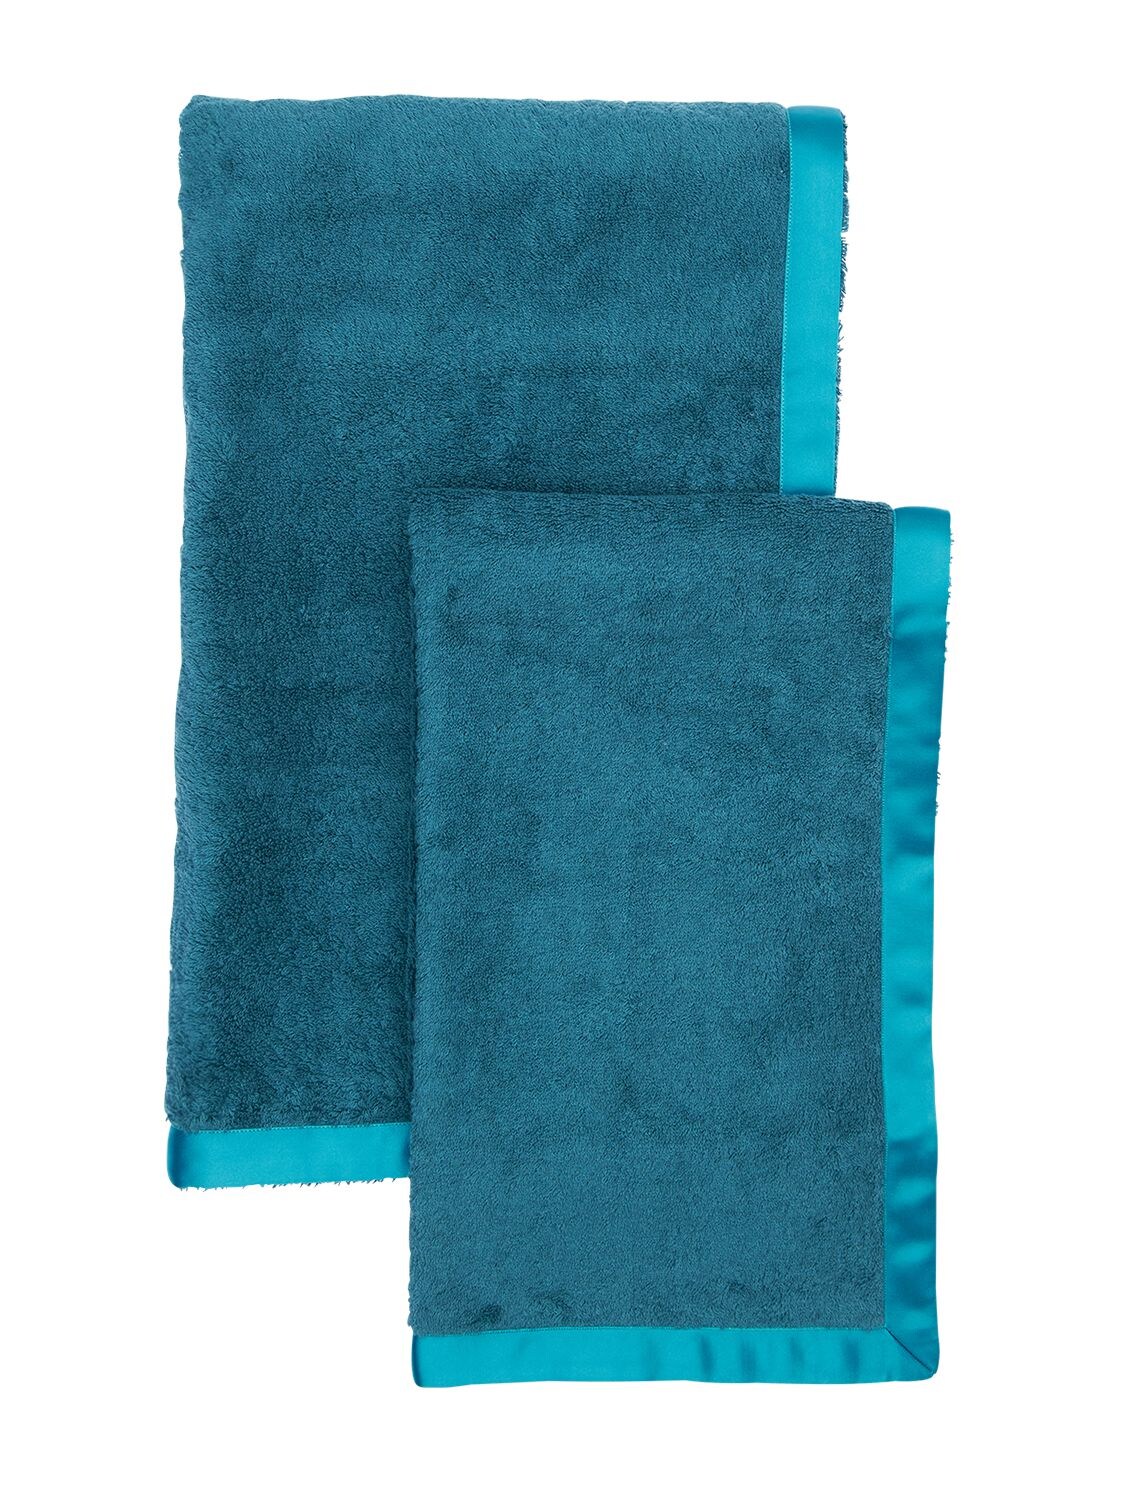 Alessandro Di Marco Set Of 2 Cotton Terrycloth Towels In Petrol